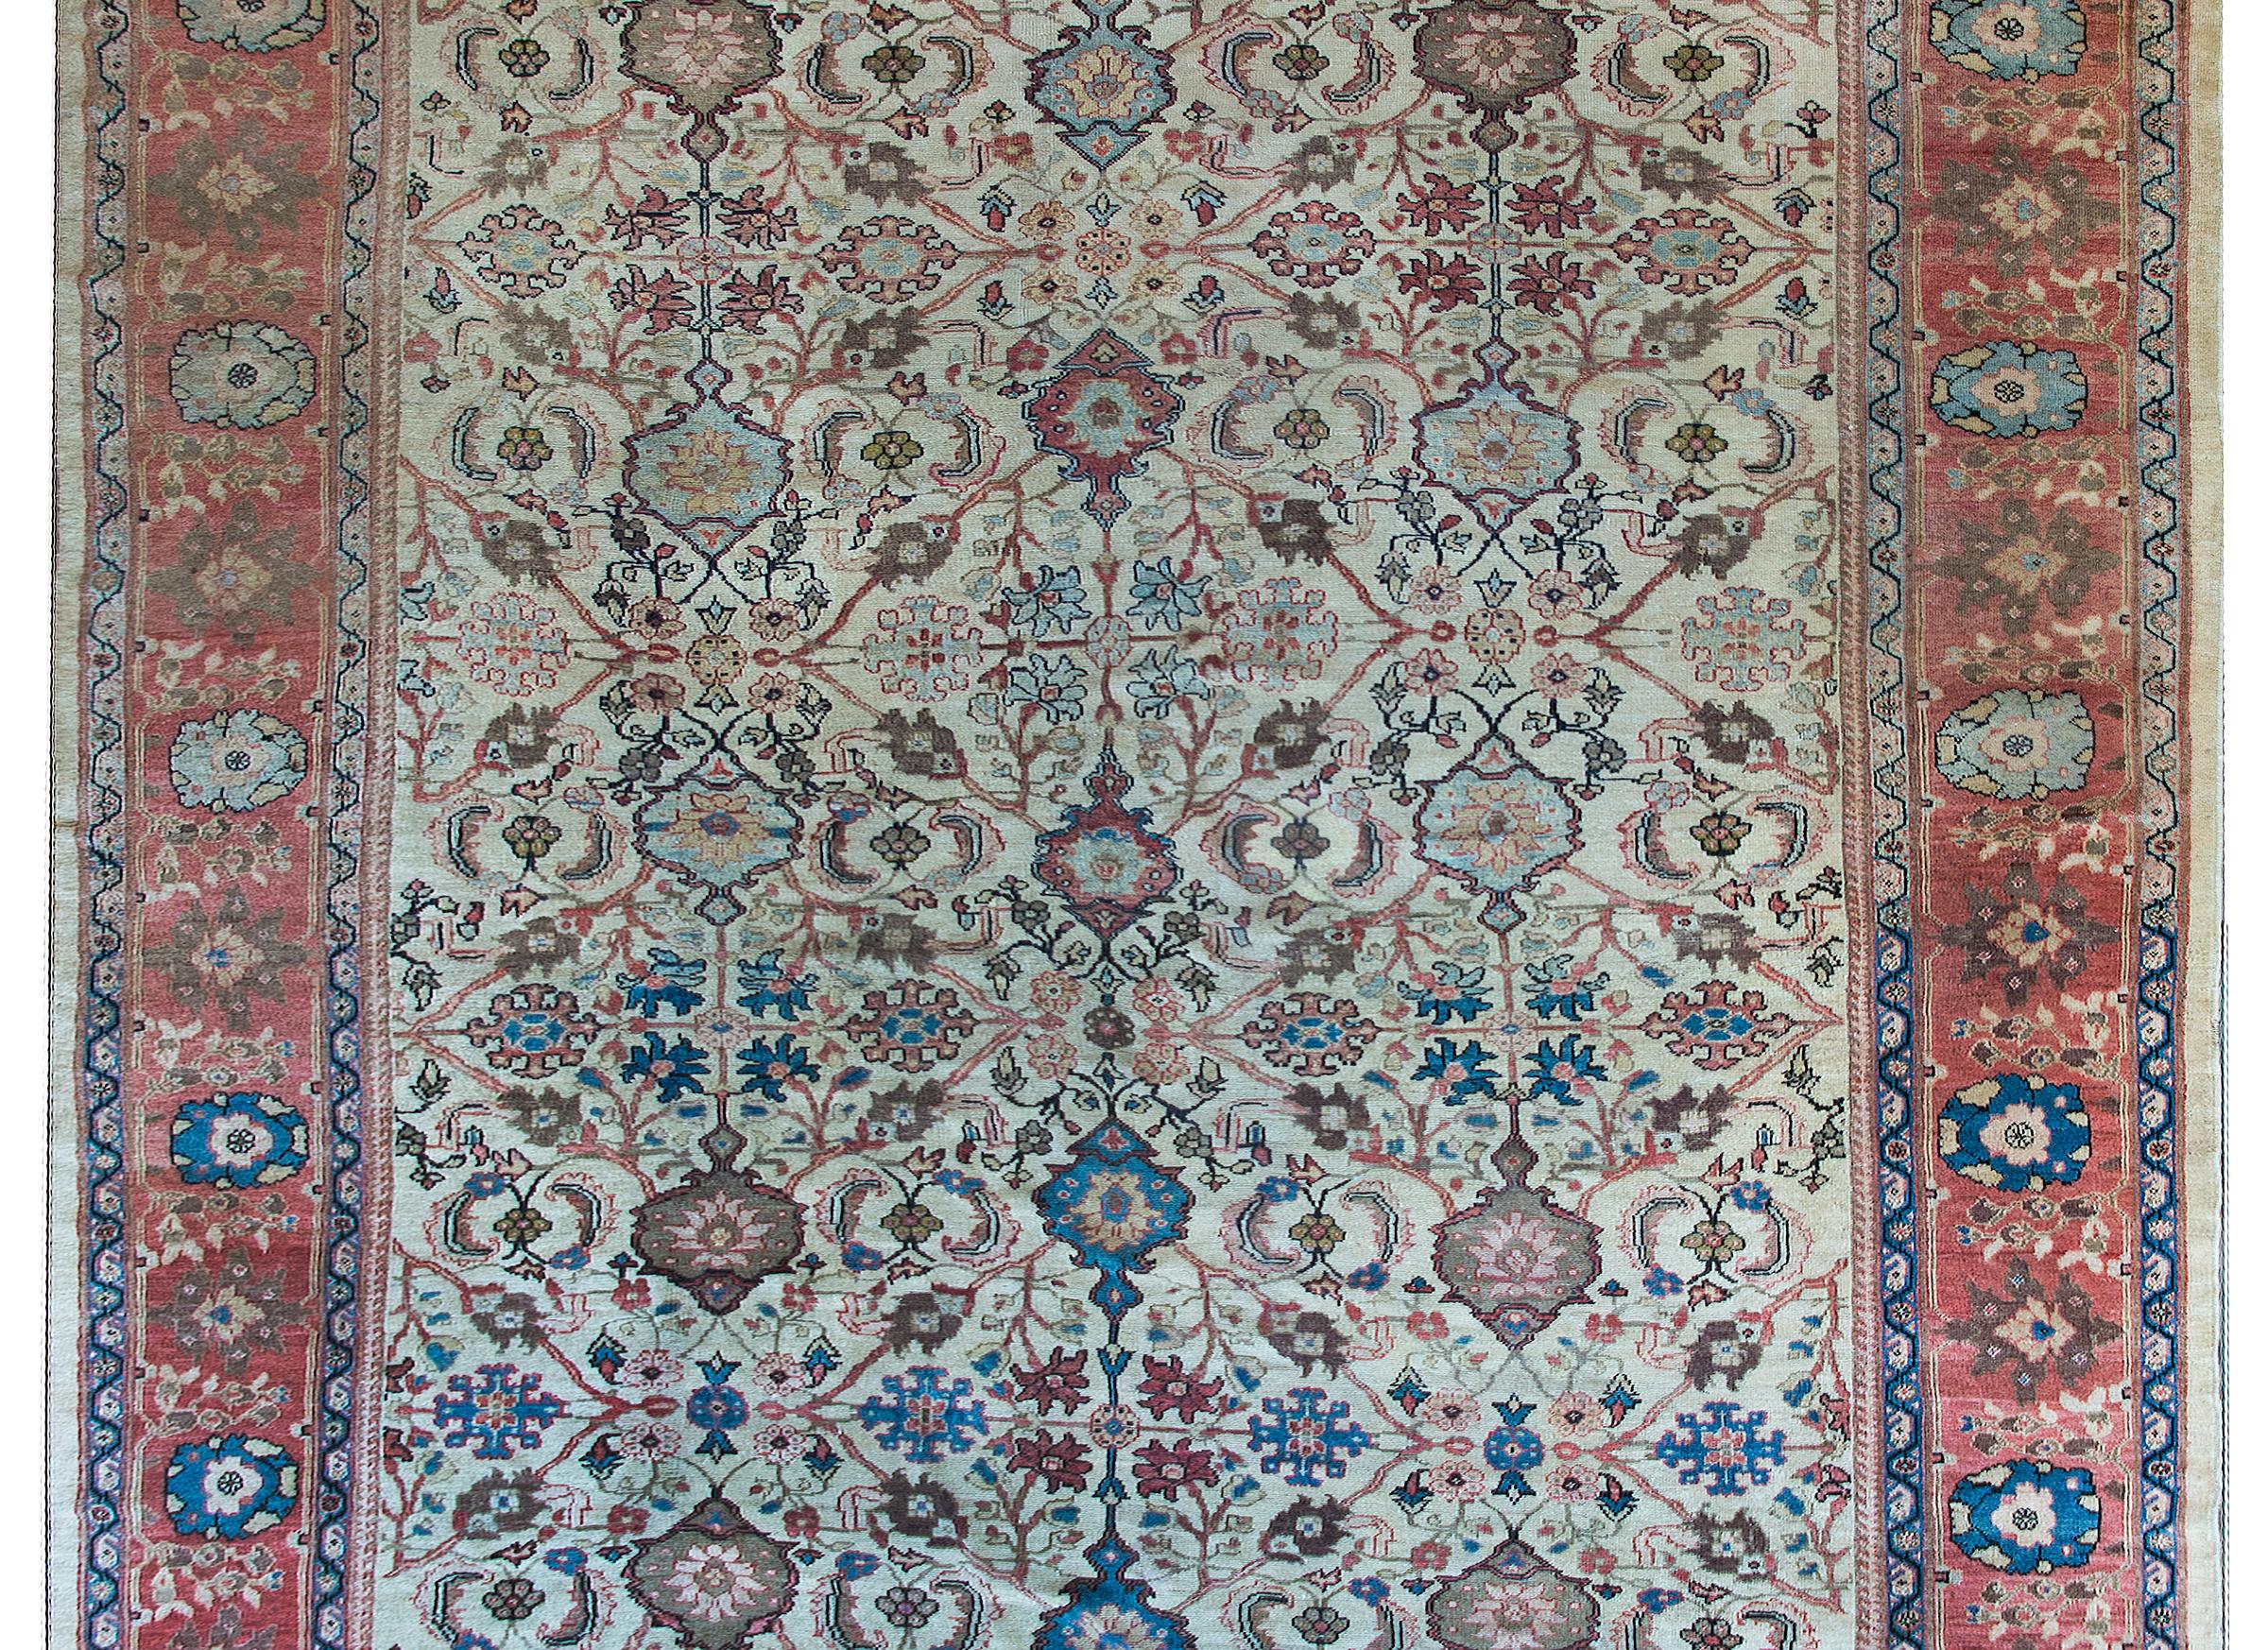 A fabulous early 20th century Persian Sultanabad rug with an overall repeated and mirrored floral and scrolling vine pattern, surrounded by a wide repeated floral patterned central stripe, and flanked by wonderful petite scrolling vine patterned